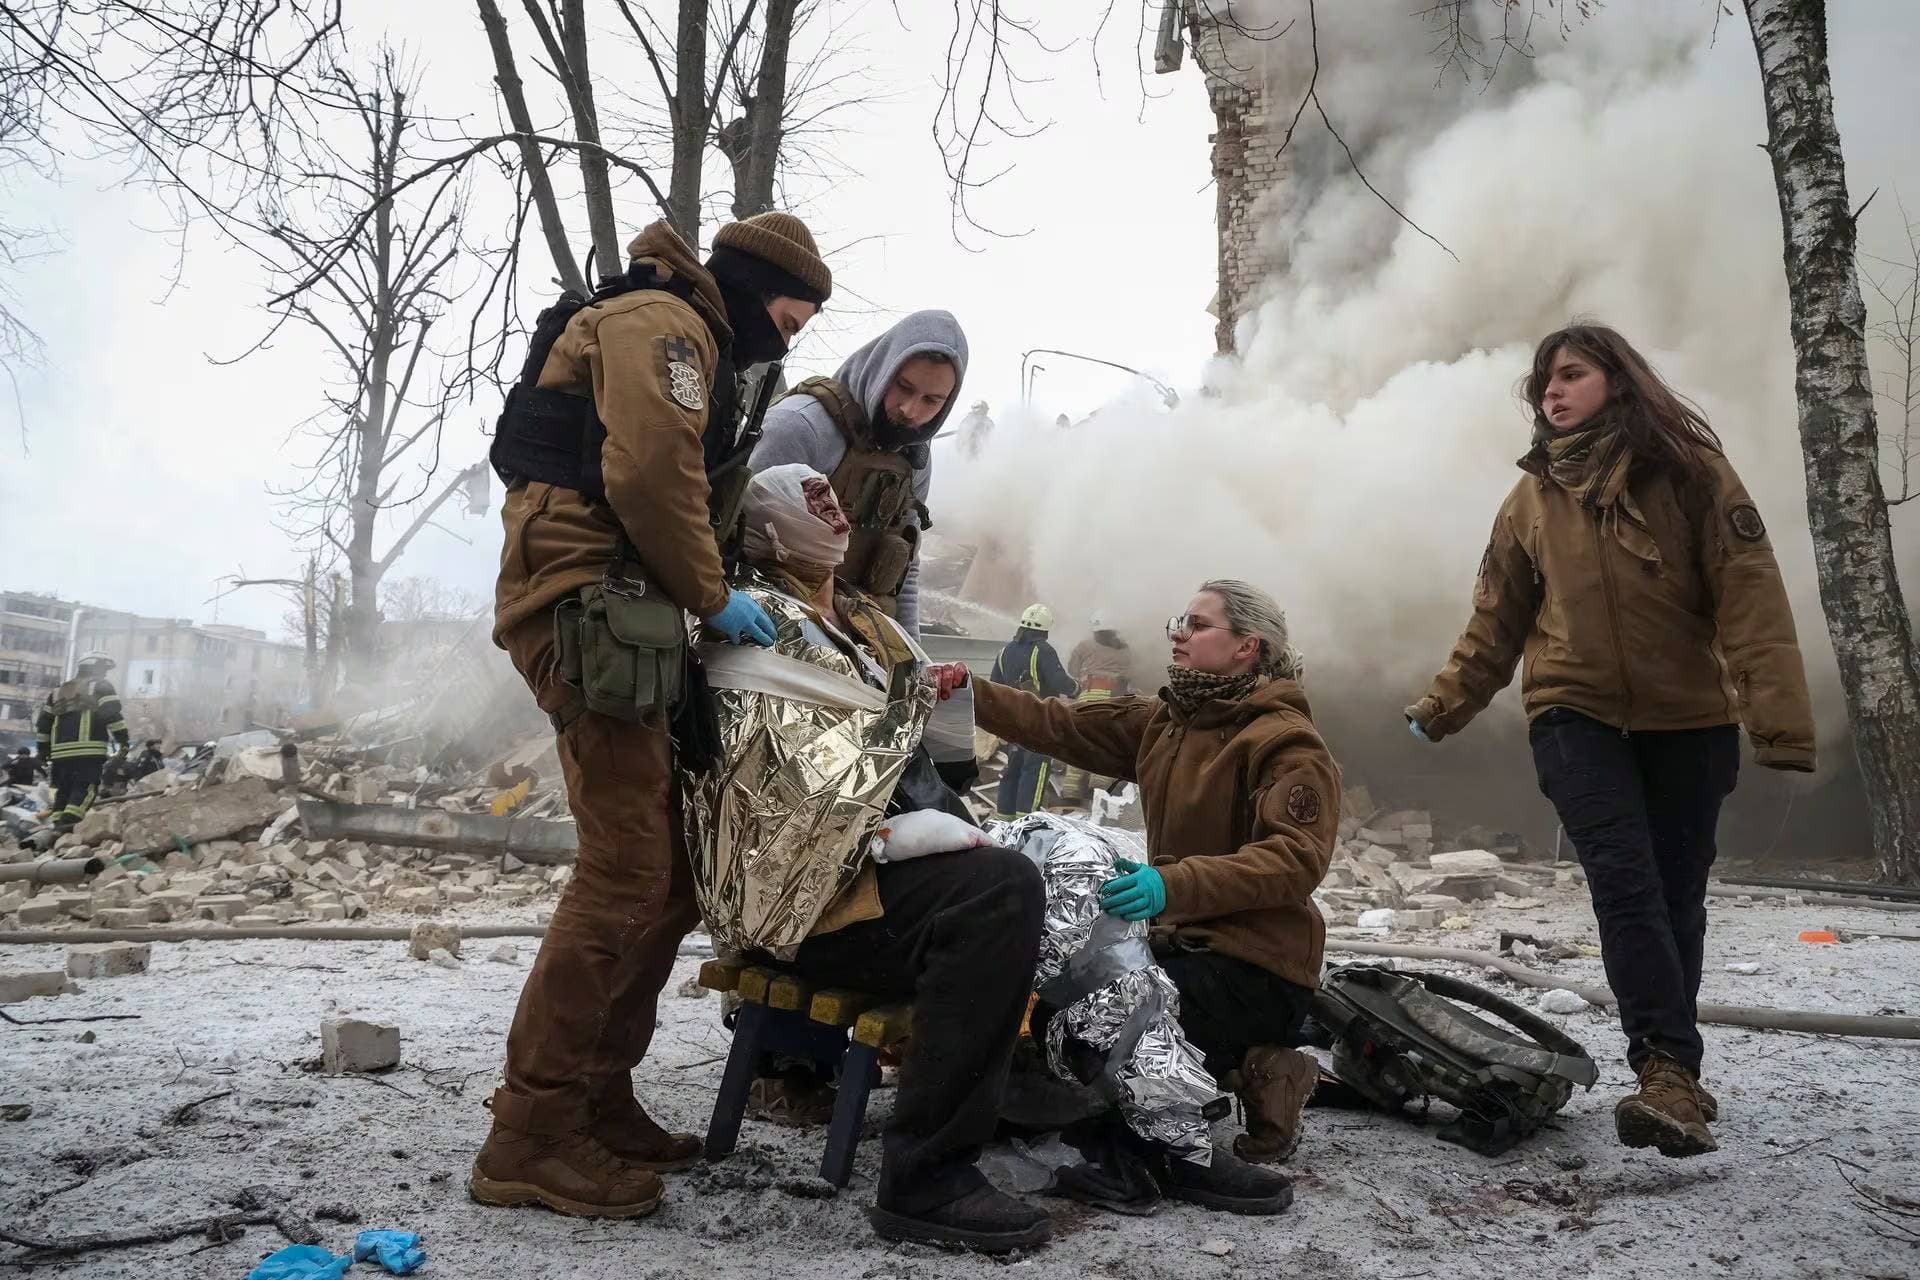 Medical workers treat a wounded resident at a site of residential buildings heavily damaged during a Russian missile attack in Kharkiv